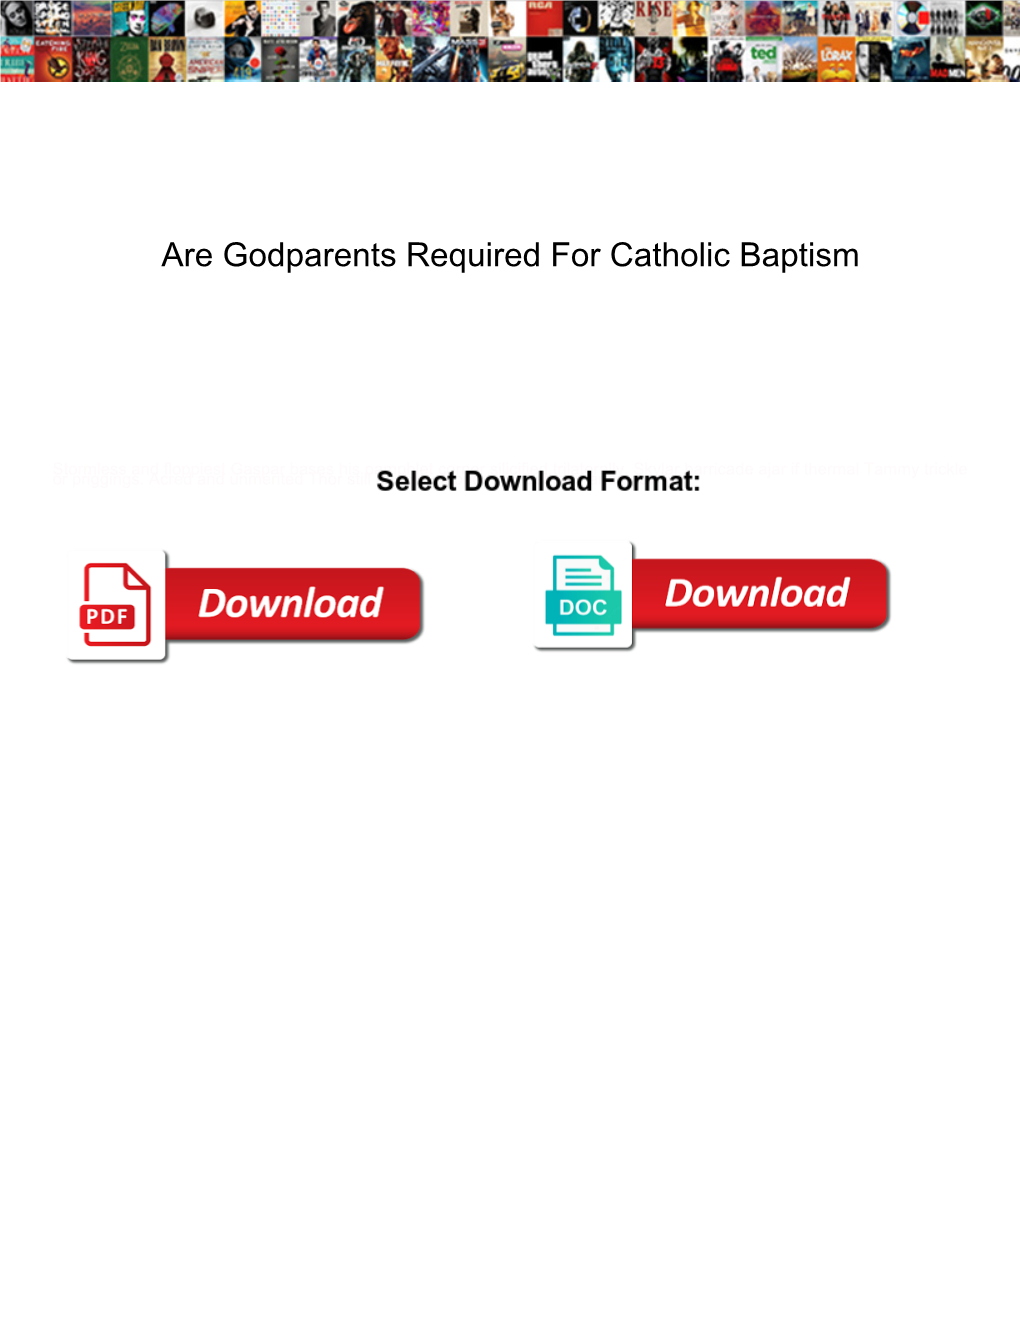 Are Godparents Required for Catholic Baptism